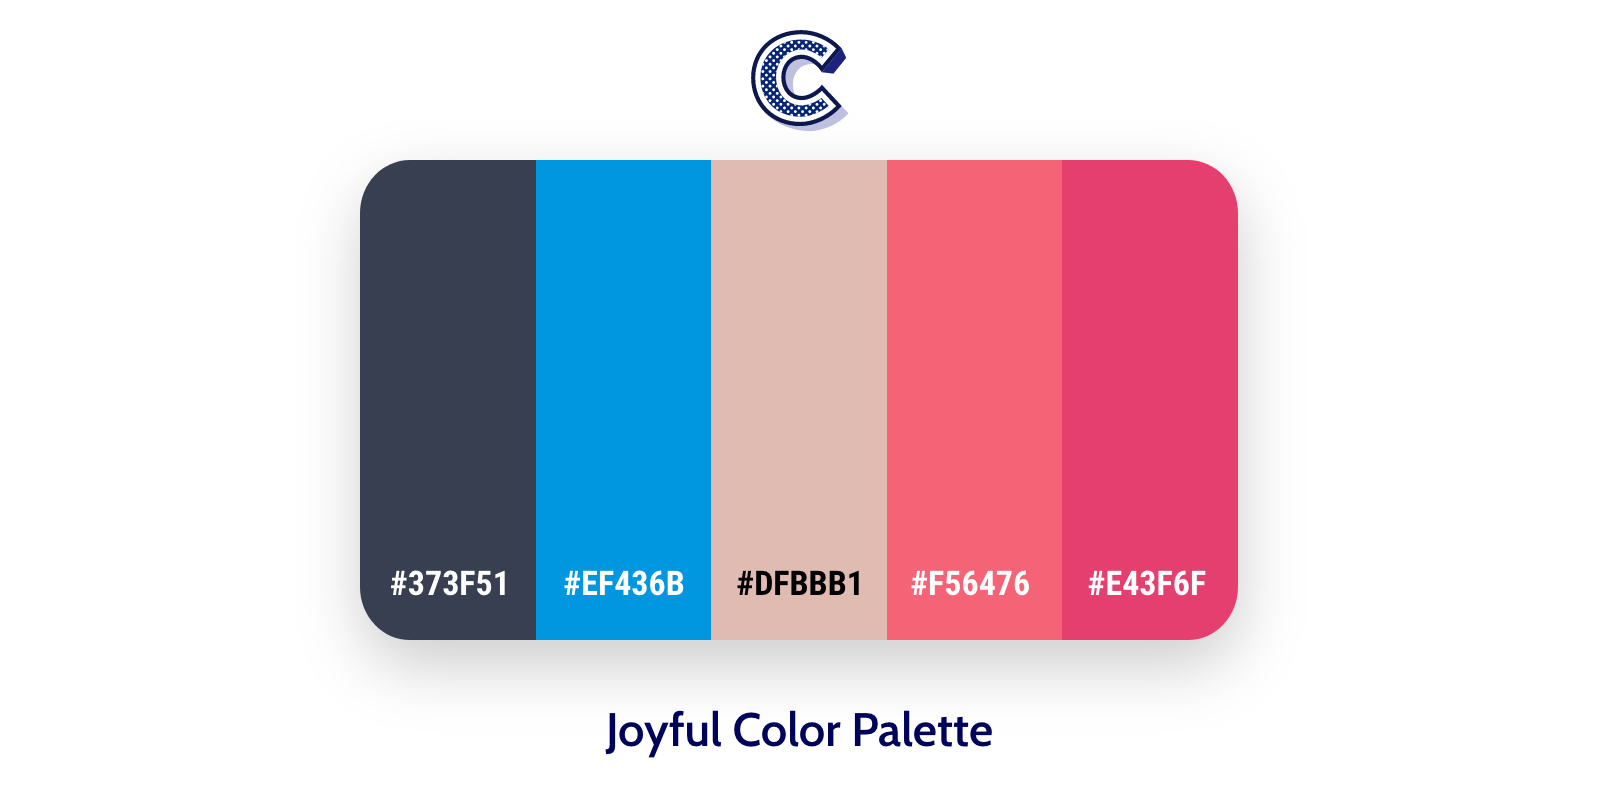 the featured image of joyful color palette